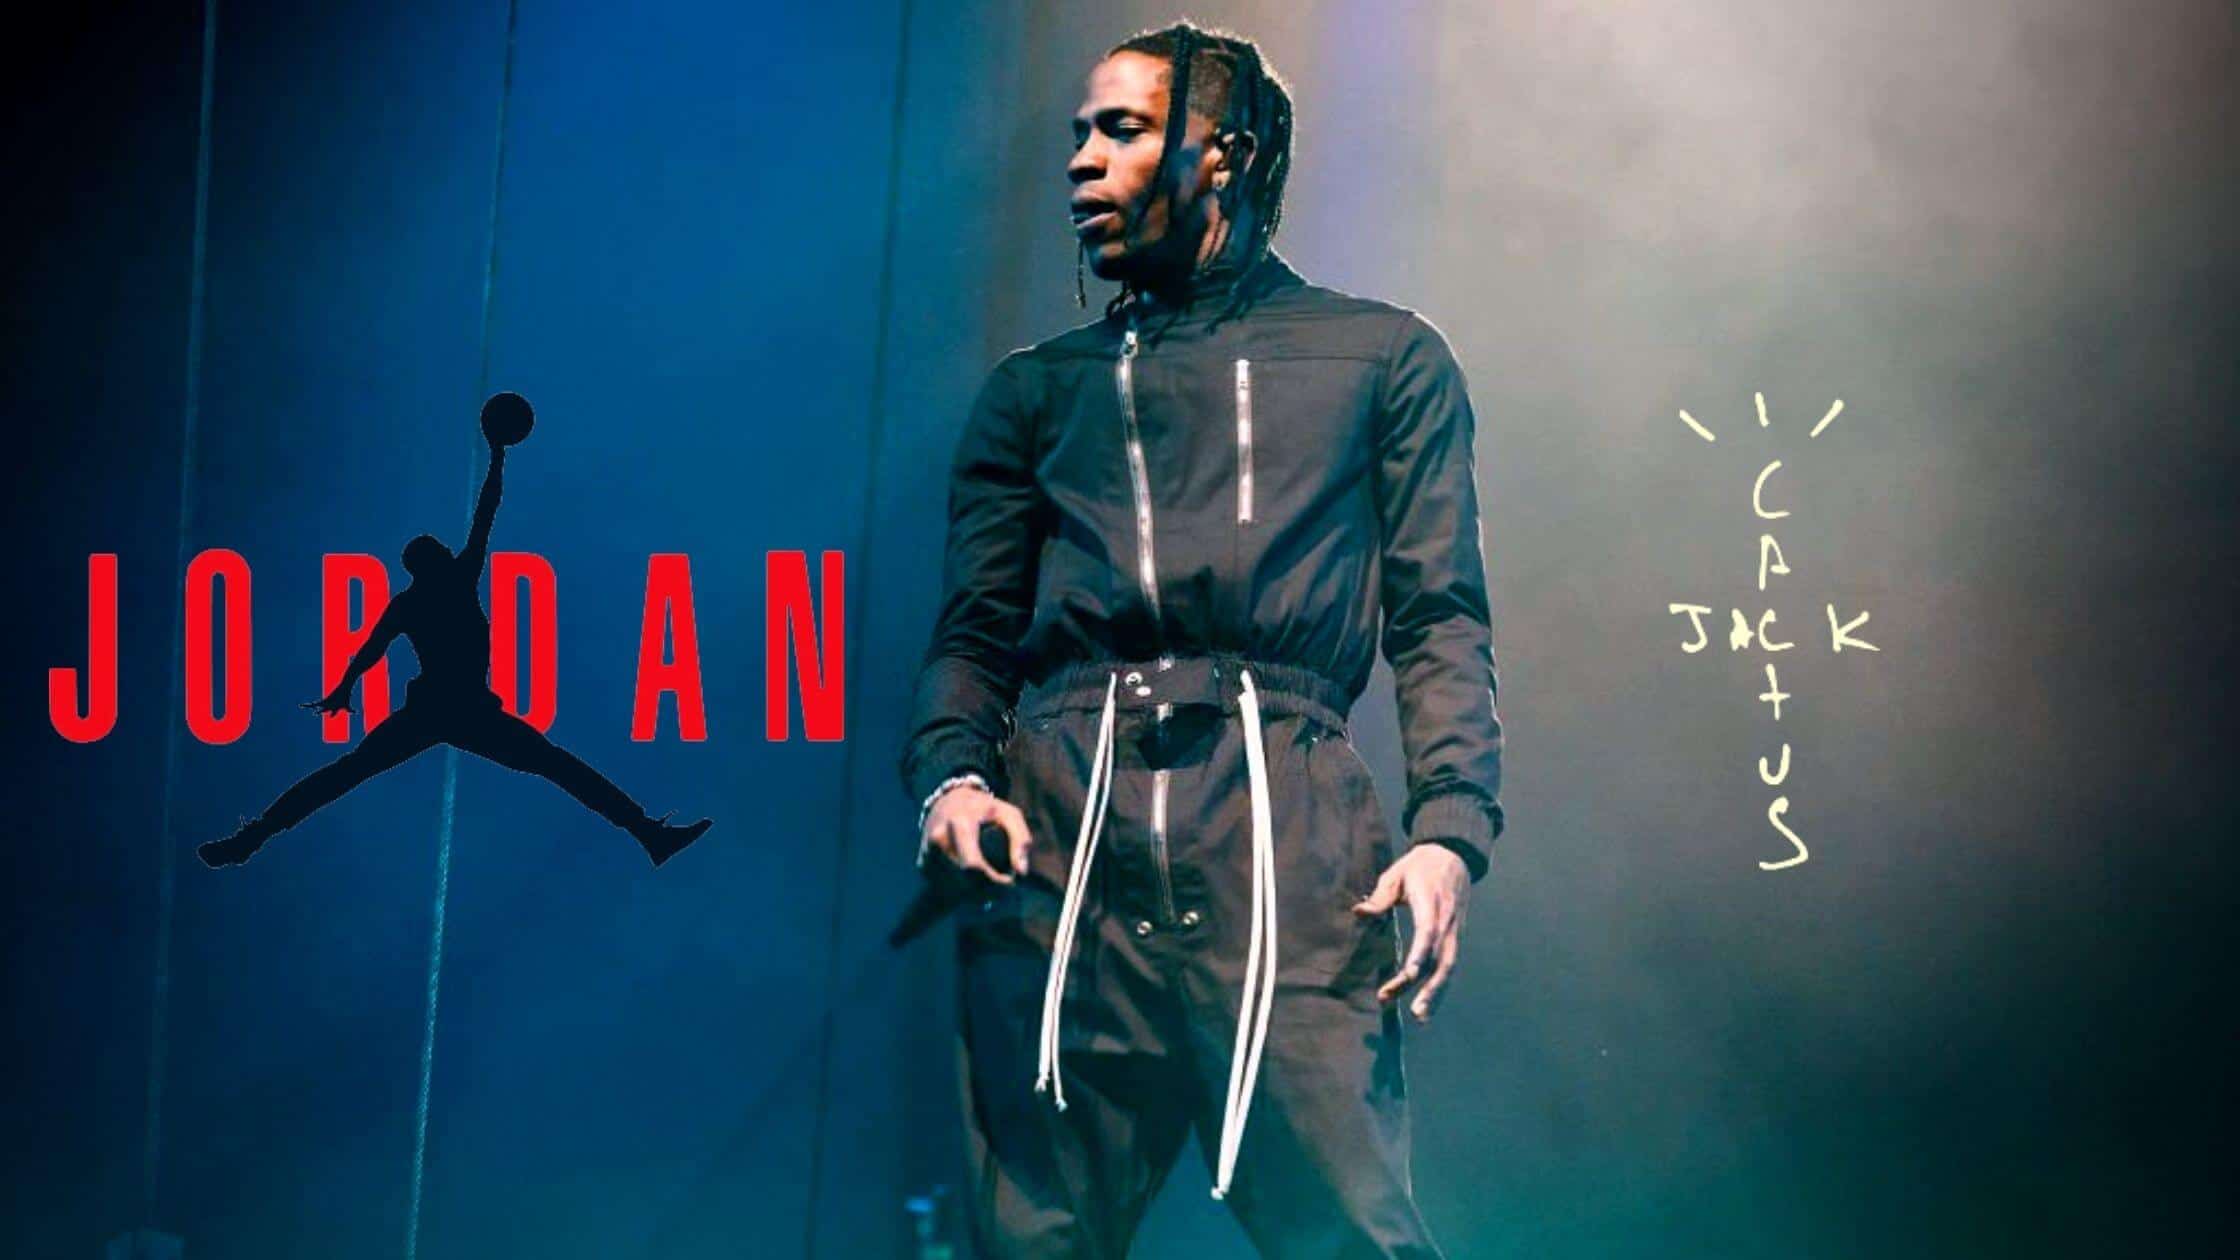 Travis Scott And Jordan Brand Launching A New Clothing Collection Together